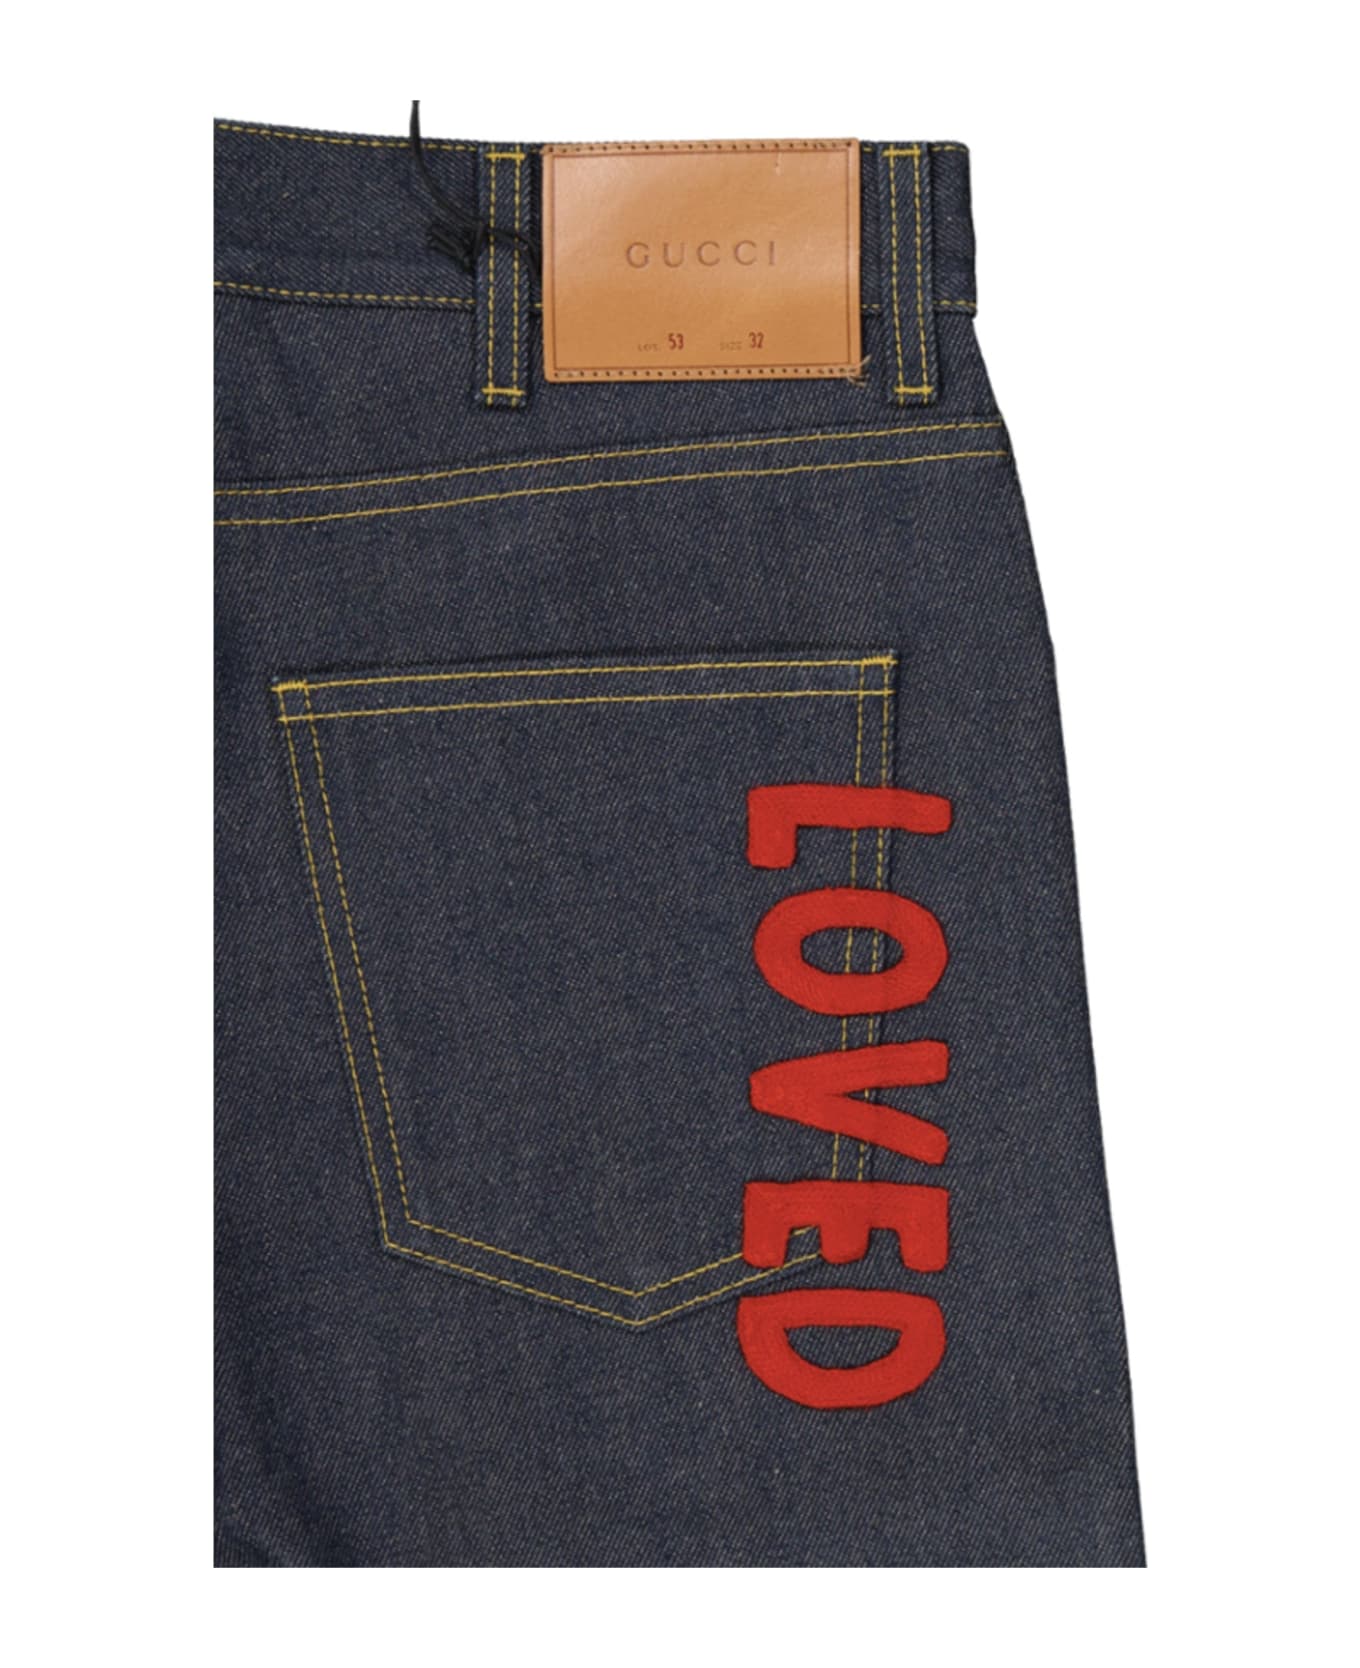 Gucci Cotton Loved Jeans - Blue デニム